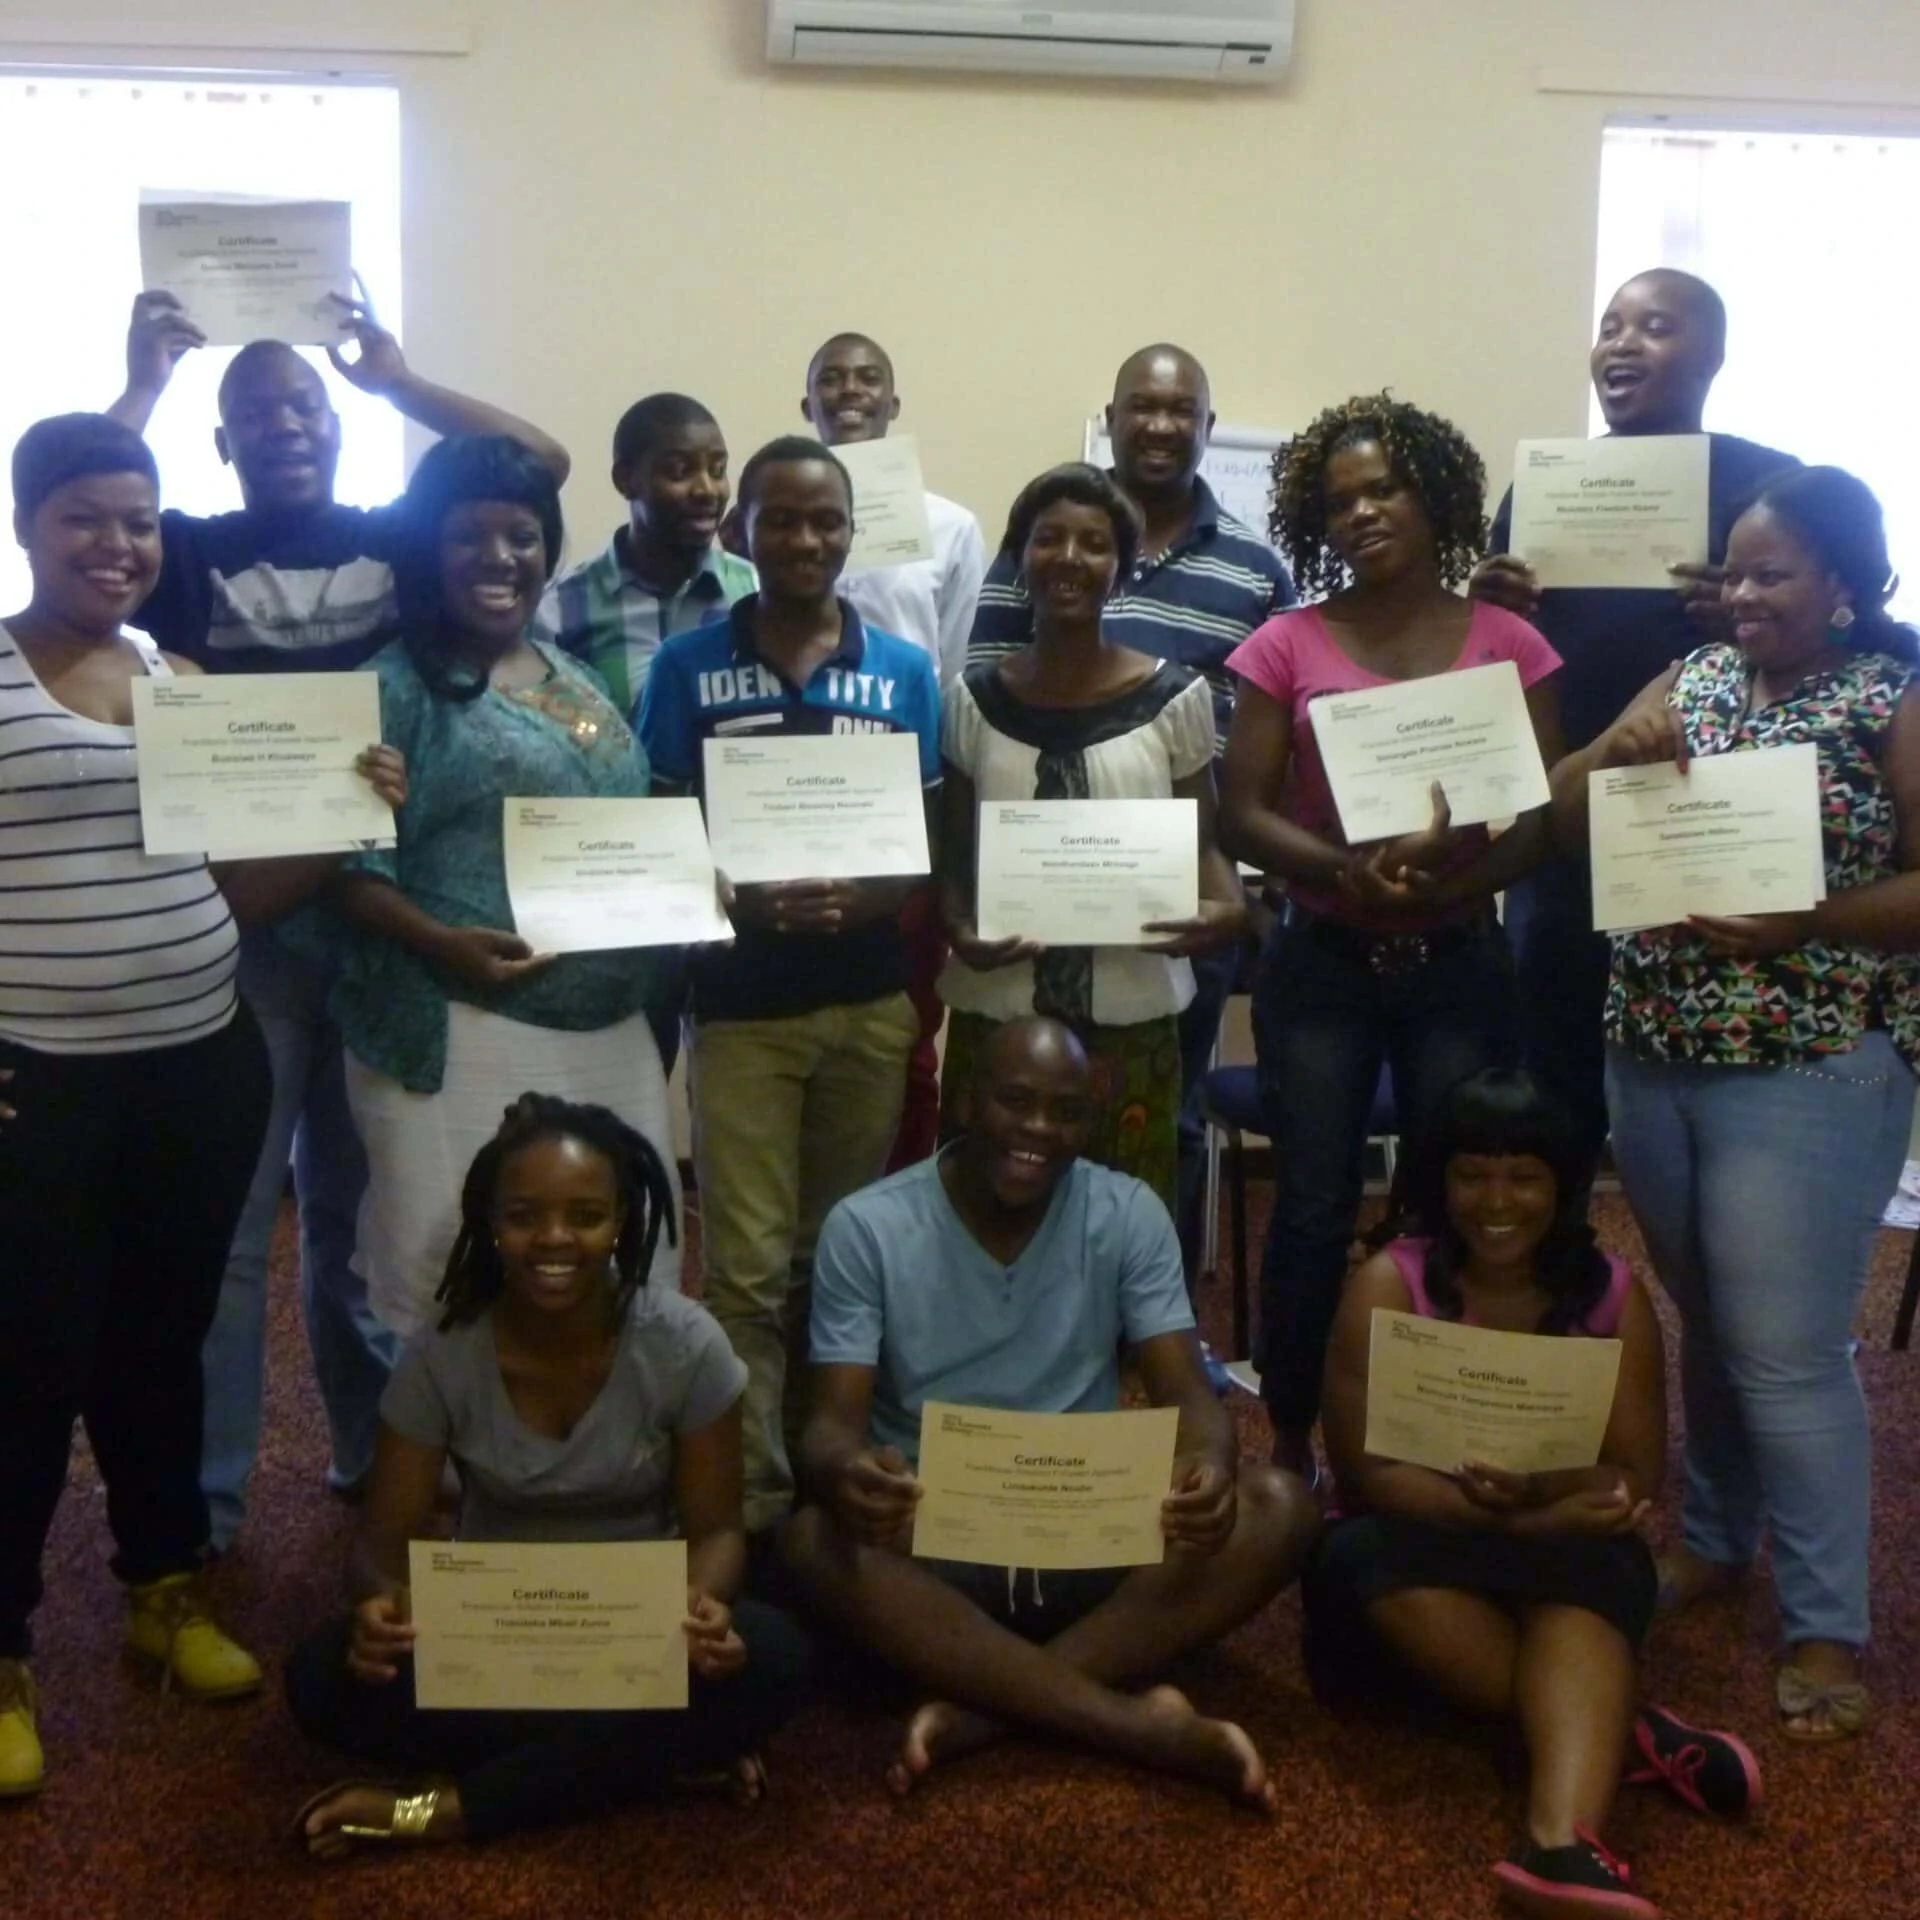 15 young South Africans received their certificate for the completed course in solution-oriented approach.